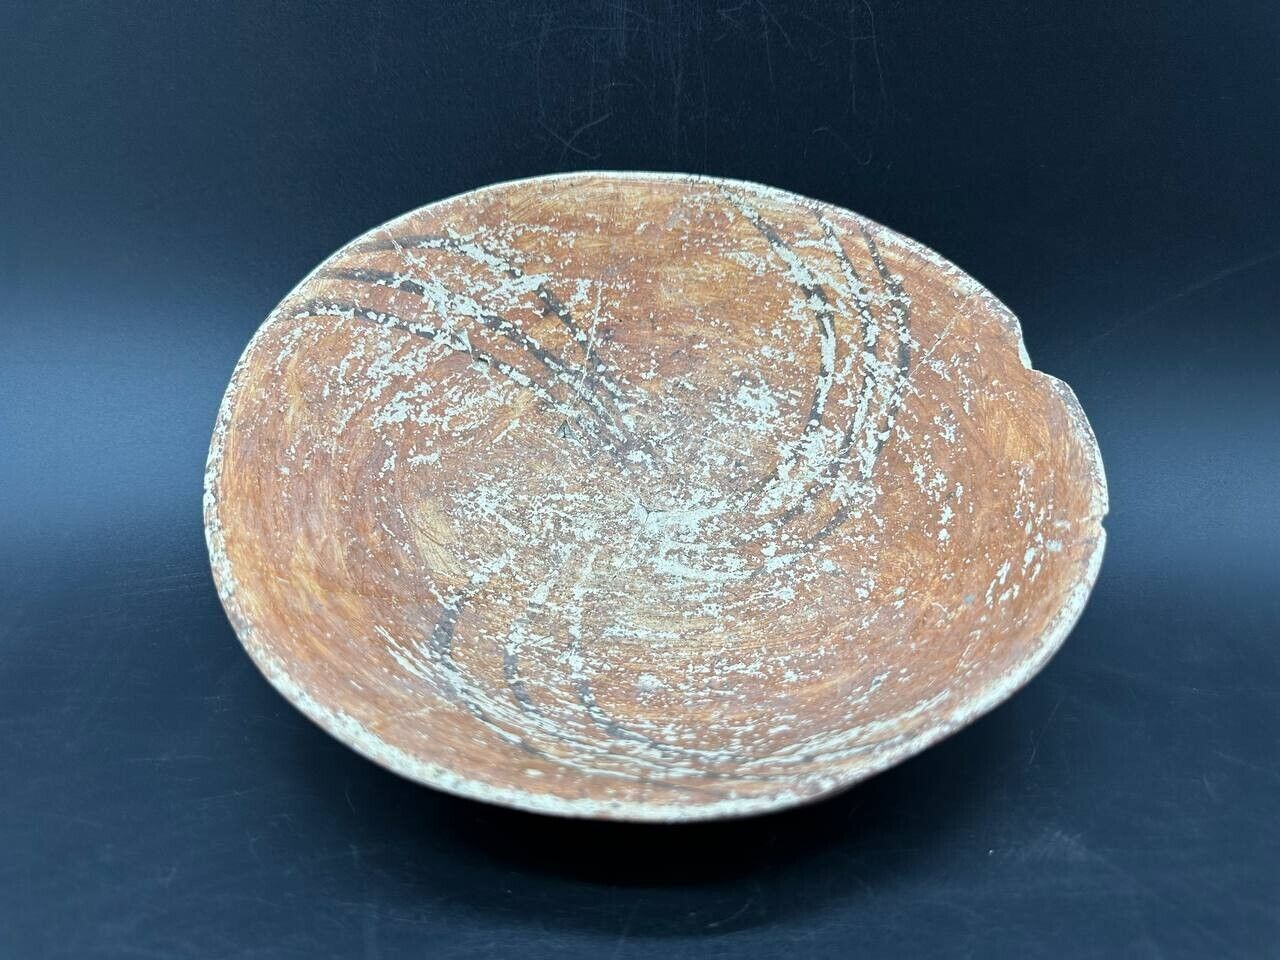 Ancient Terracotta Plate of the Trypillian Culture From 5400 and 2750 BC.